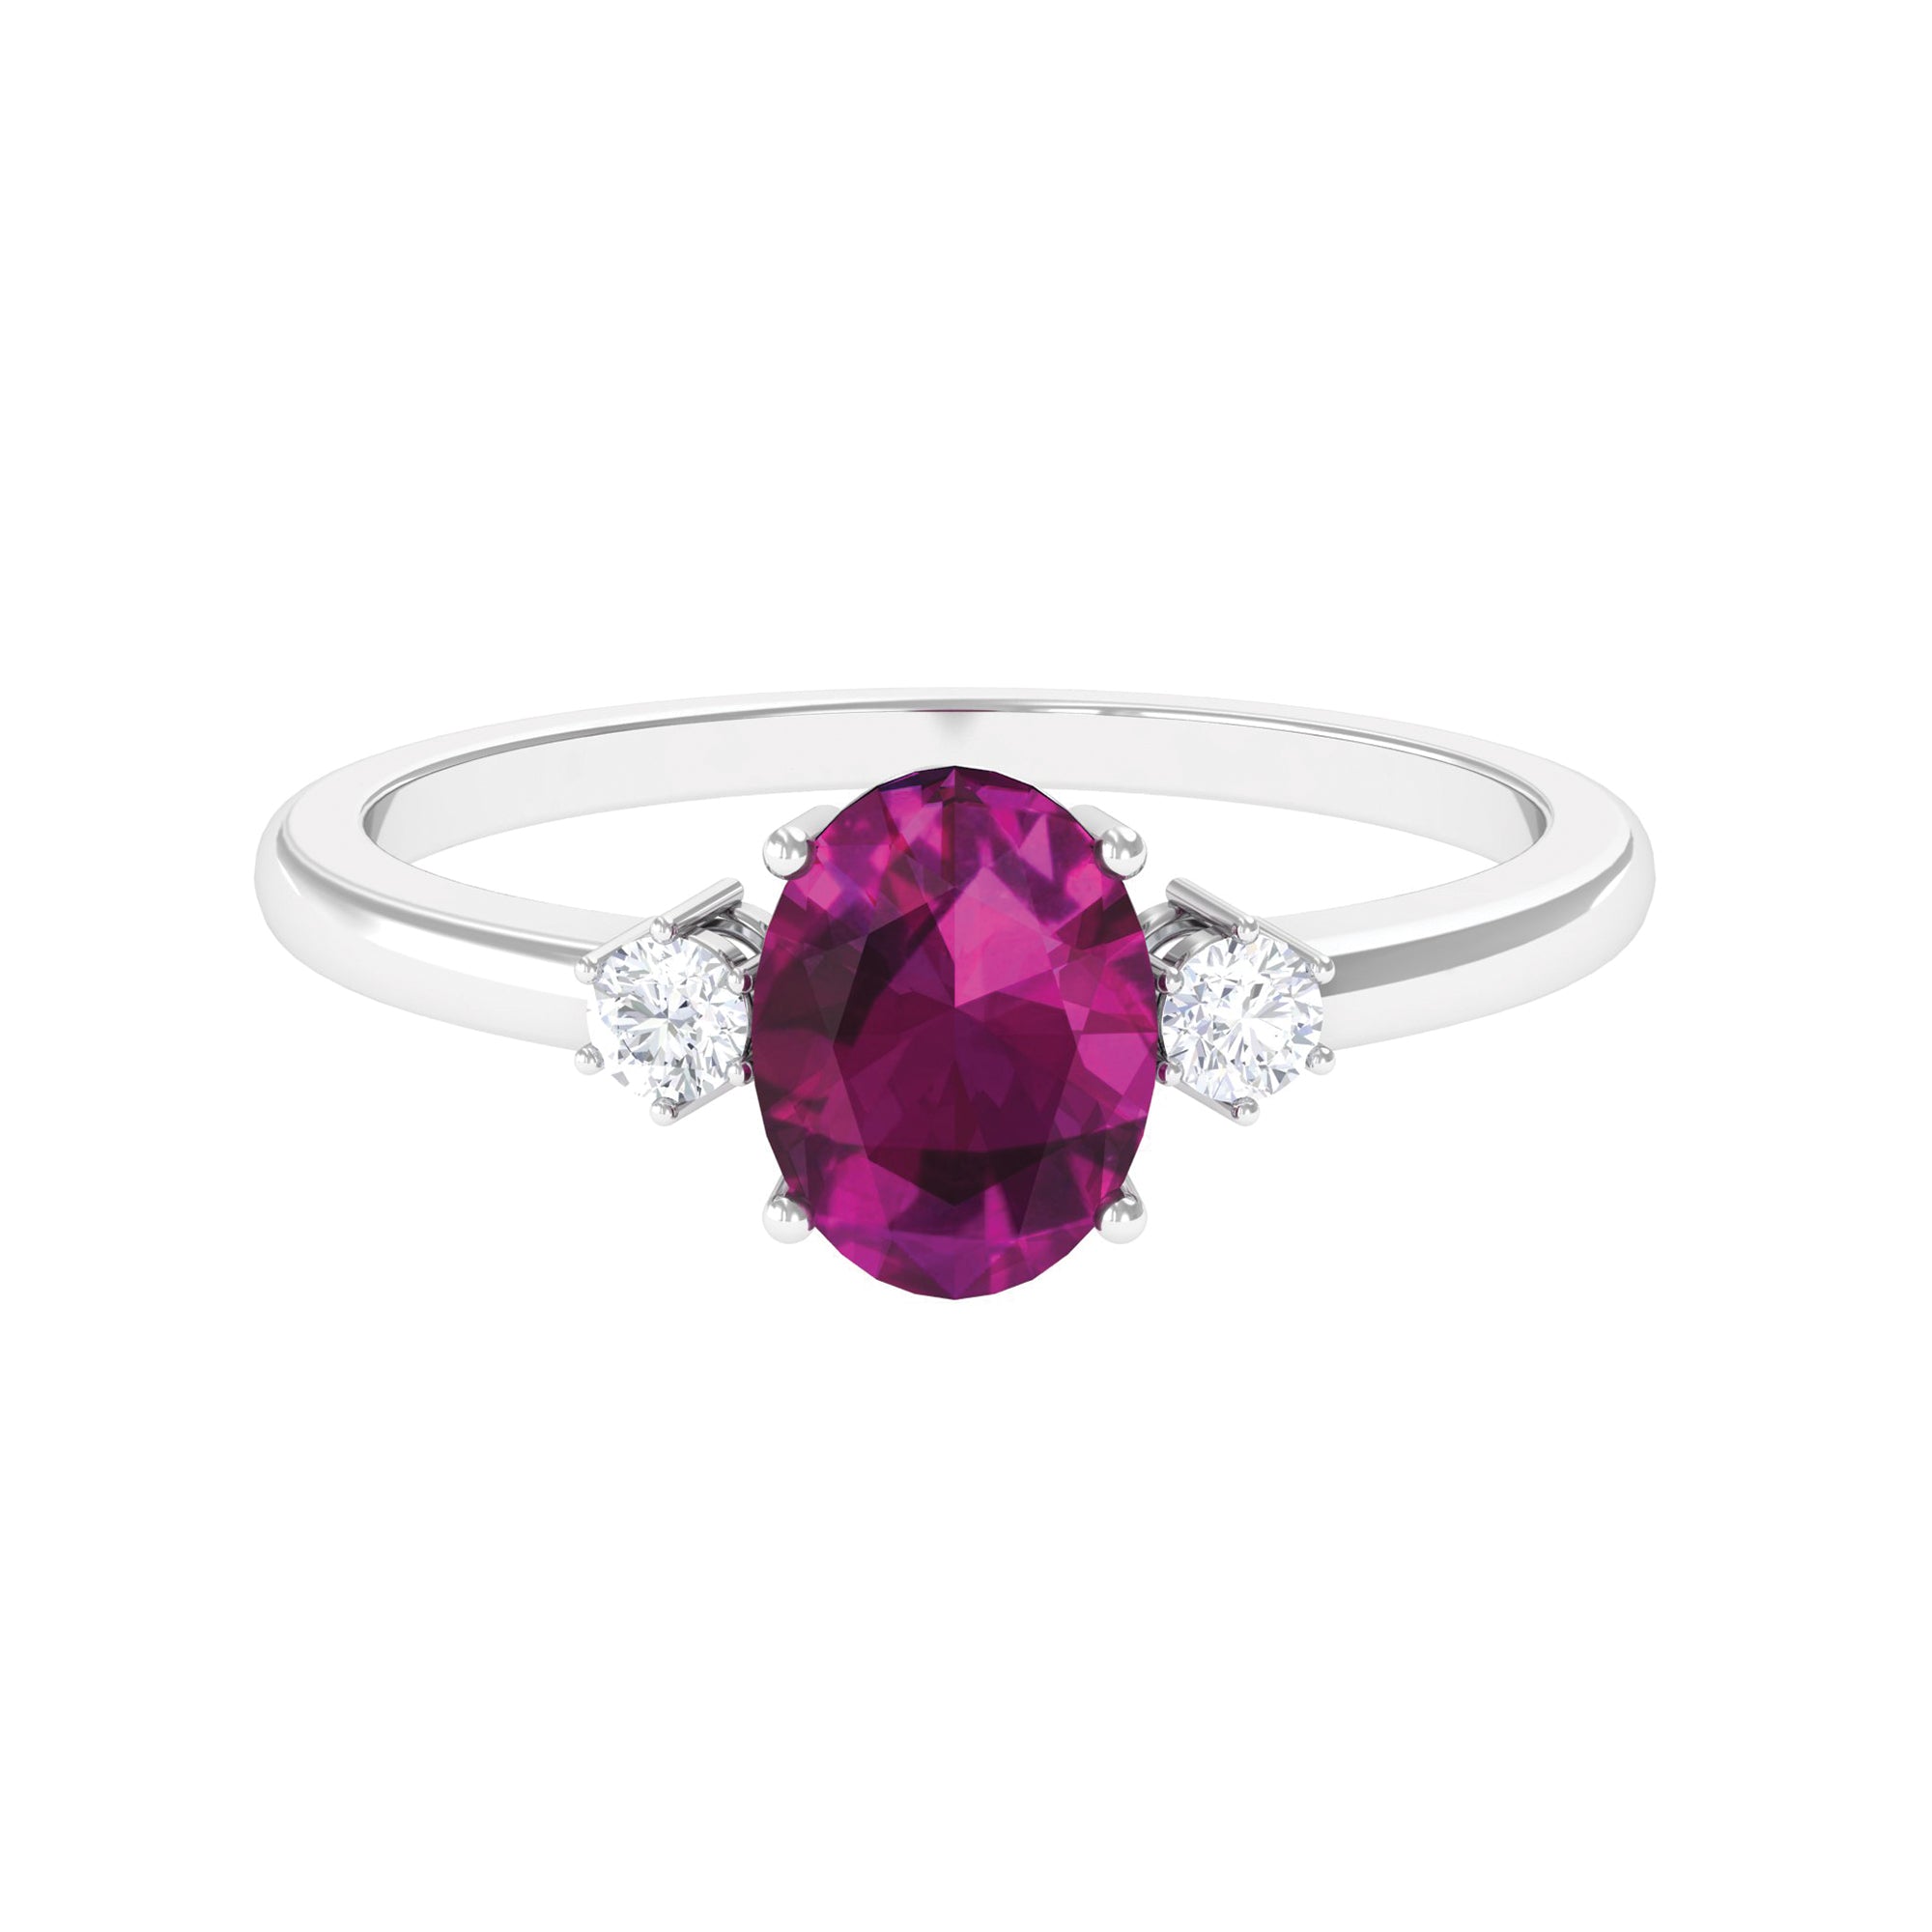 1.75 CT Oval Rhodolite Solitaire Engagement Ring with Moissanite in Gold Rhodolite - ( AAA ) - Quality - Rosec Jewels